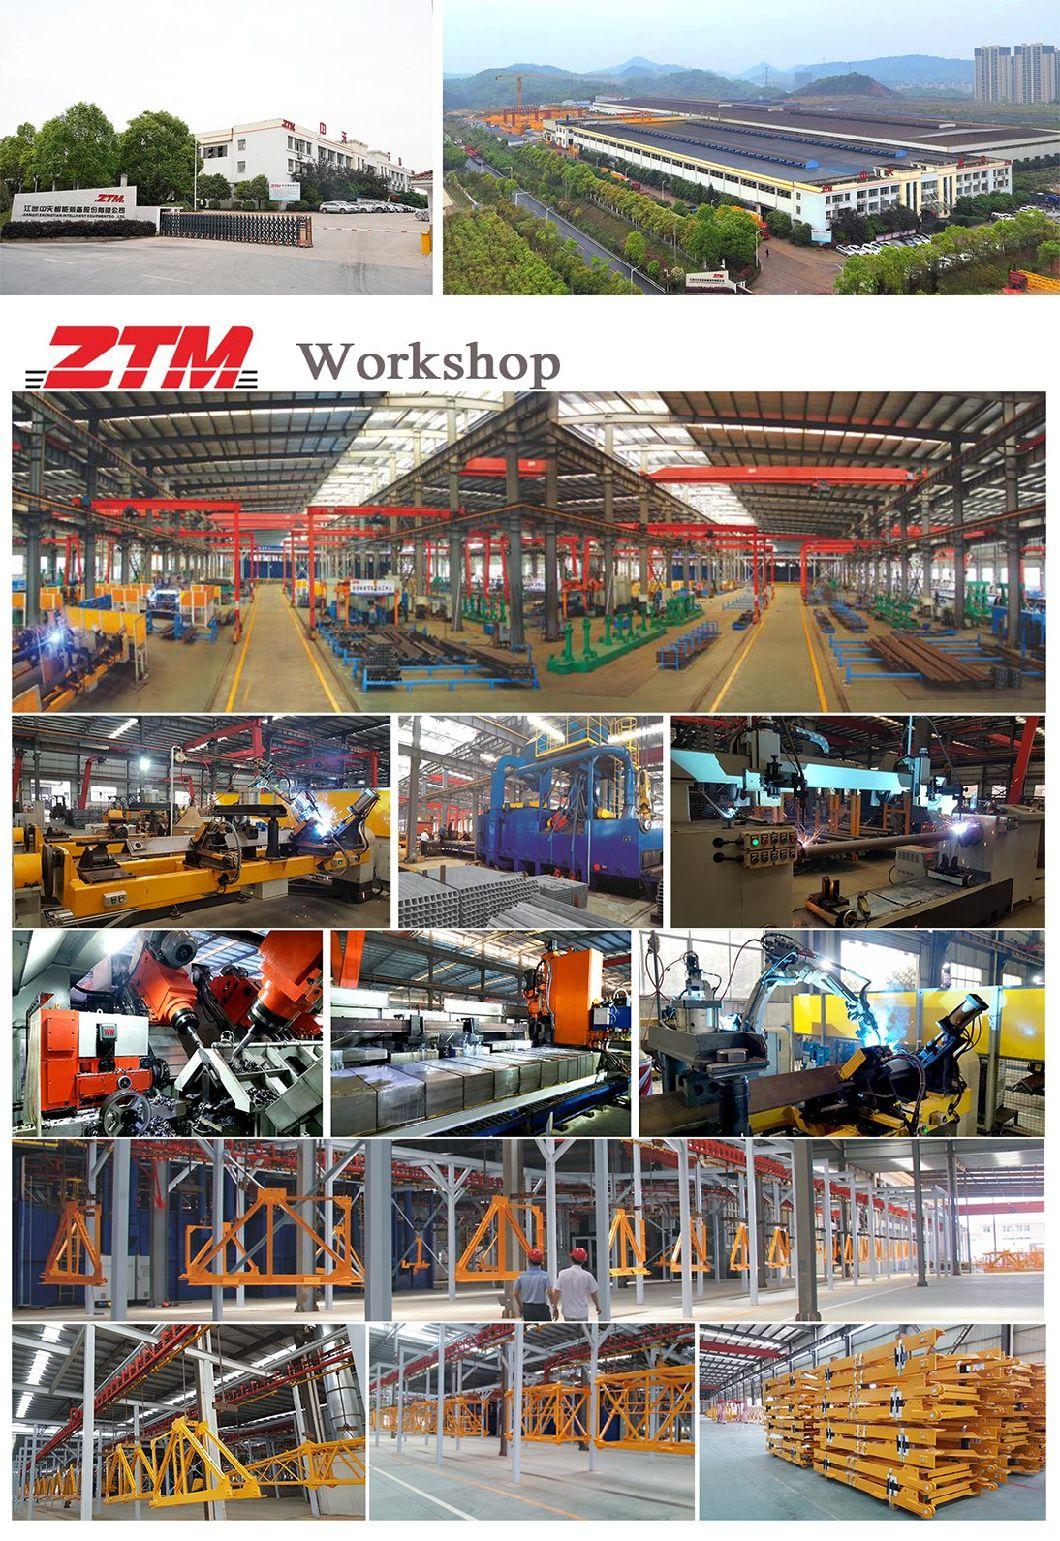 Ztm336 18t Flat-Top Construction Tower Crane with Big Cabin